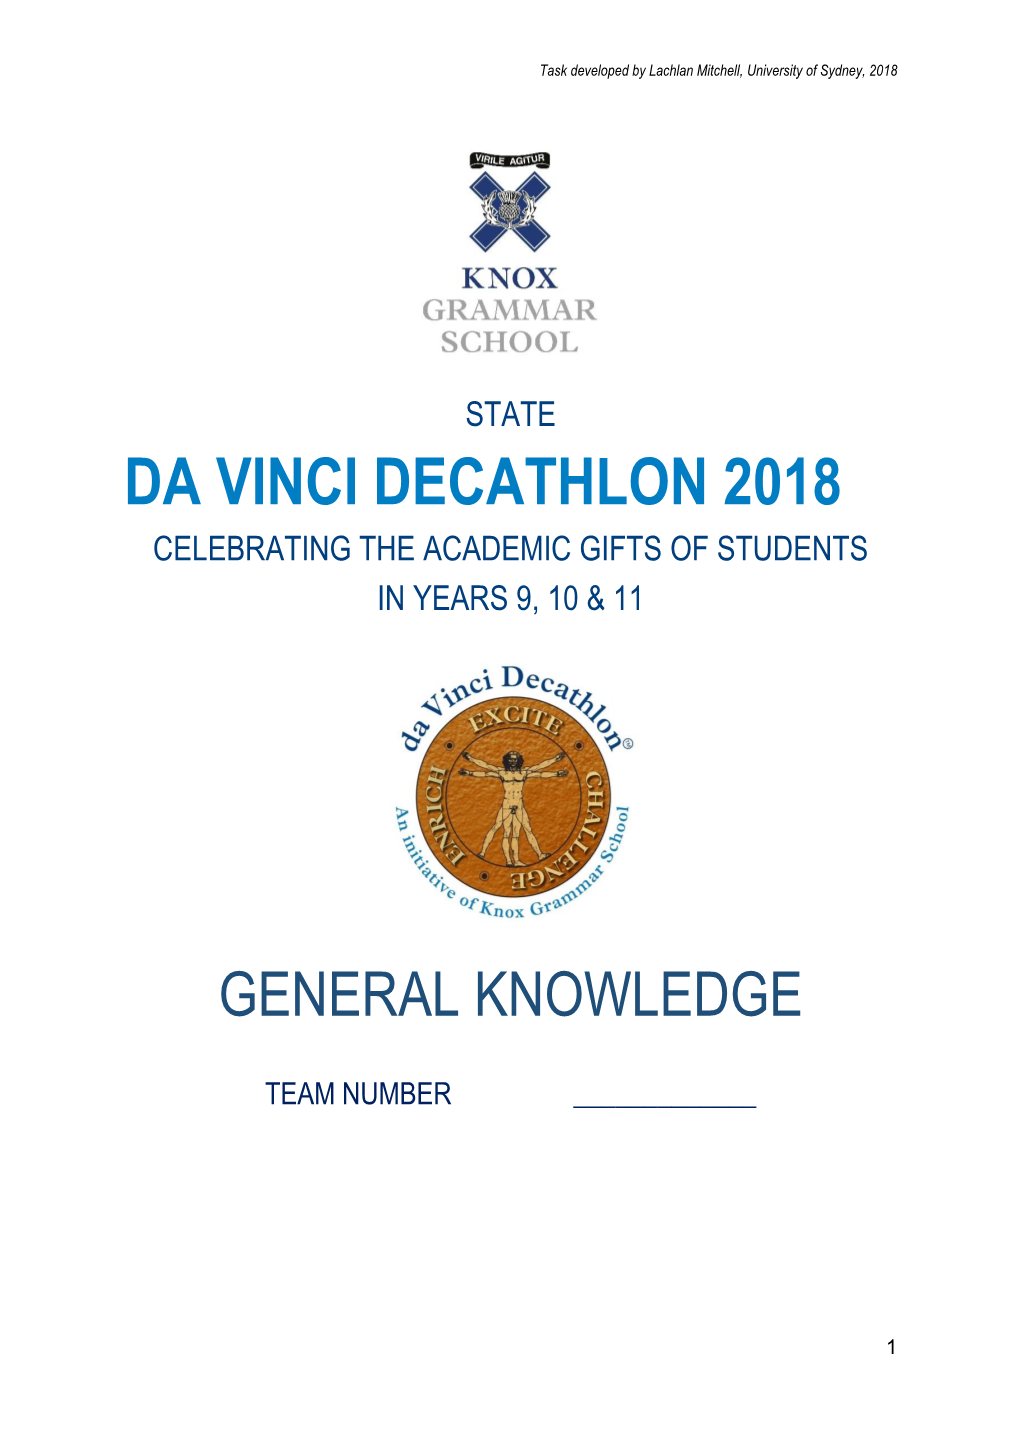 Da Vinci Decathlon 2018 Celebrating the Academic Gifts of Students in Years 9, 10 & 11